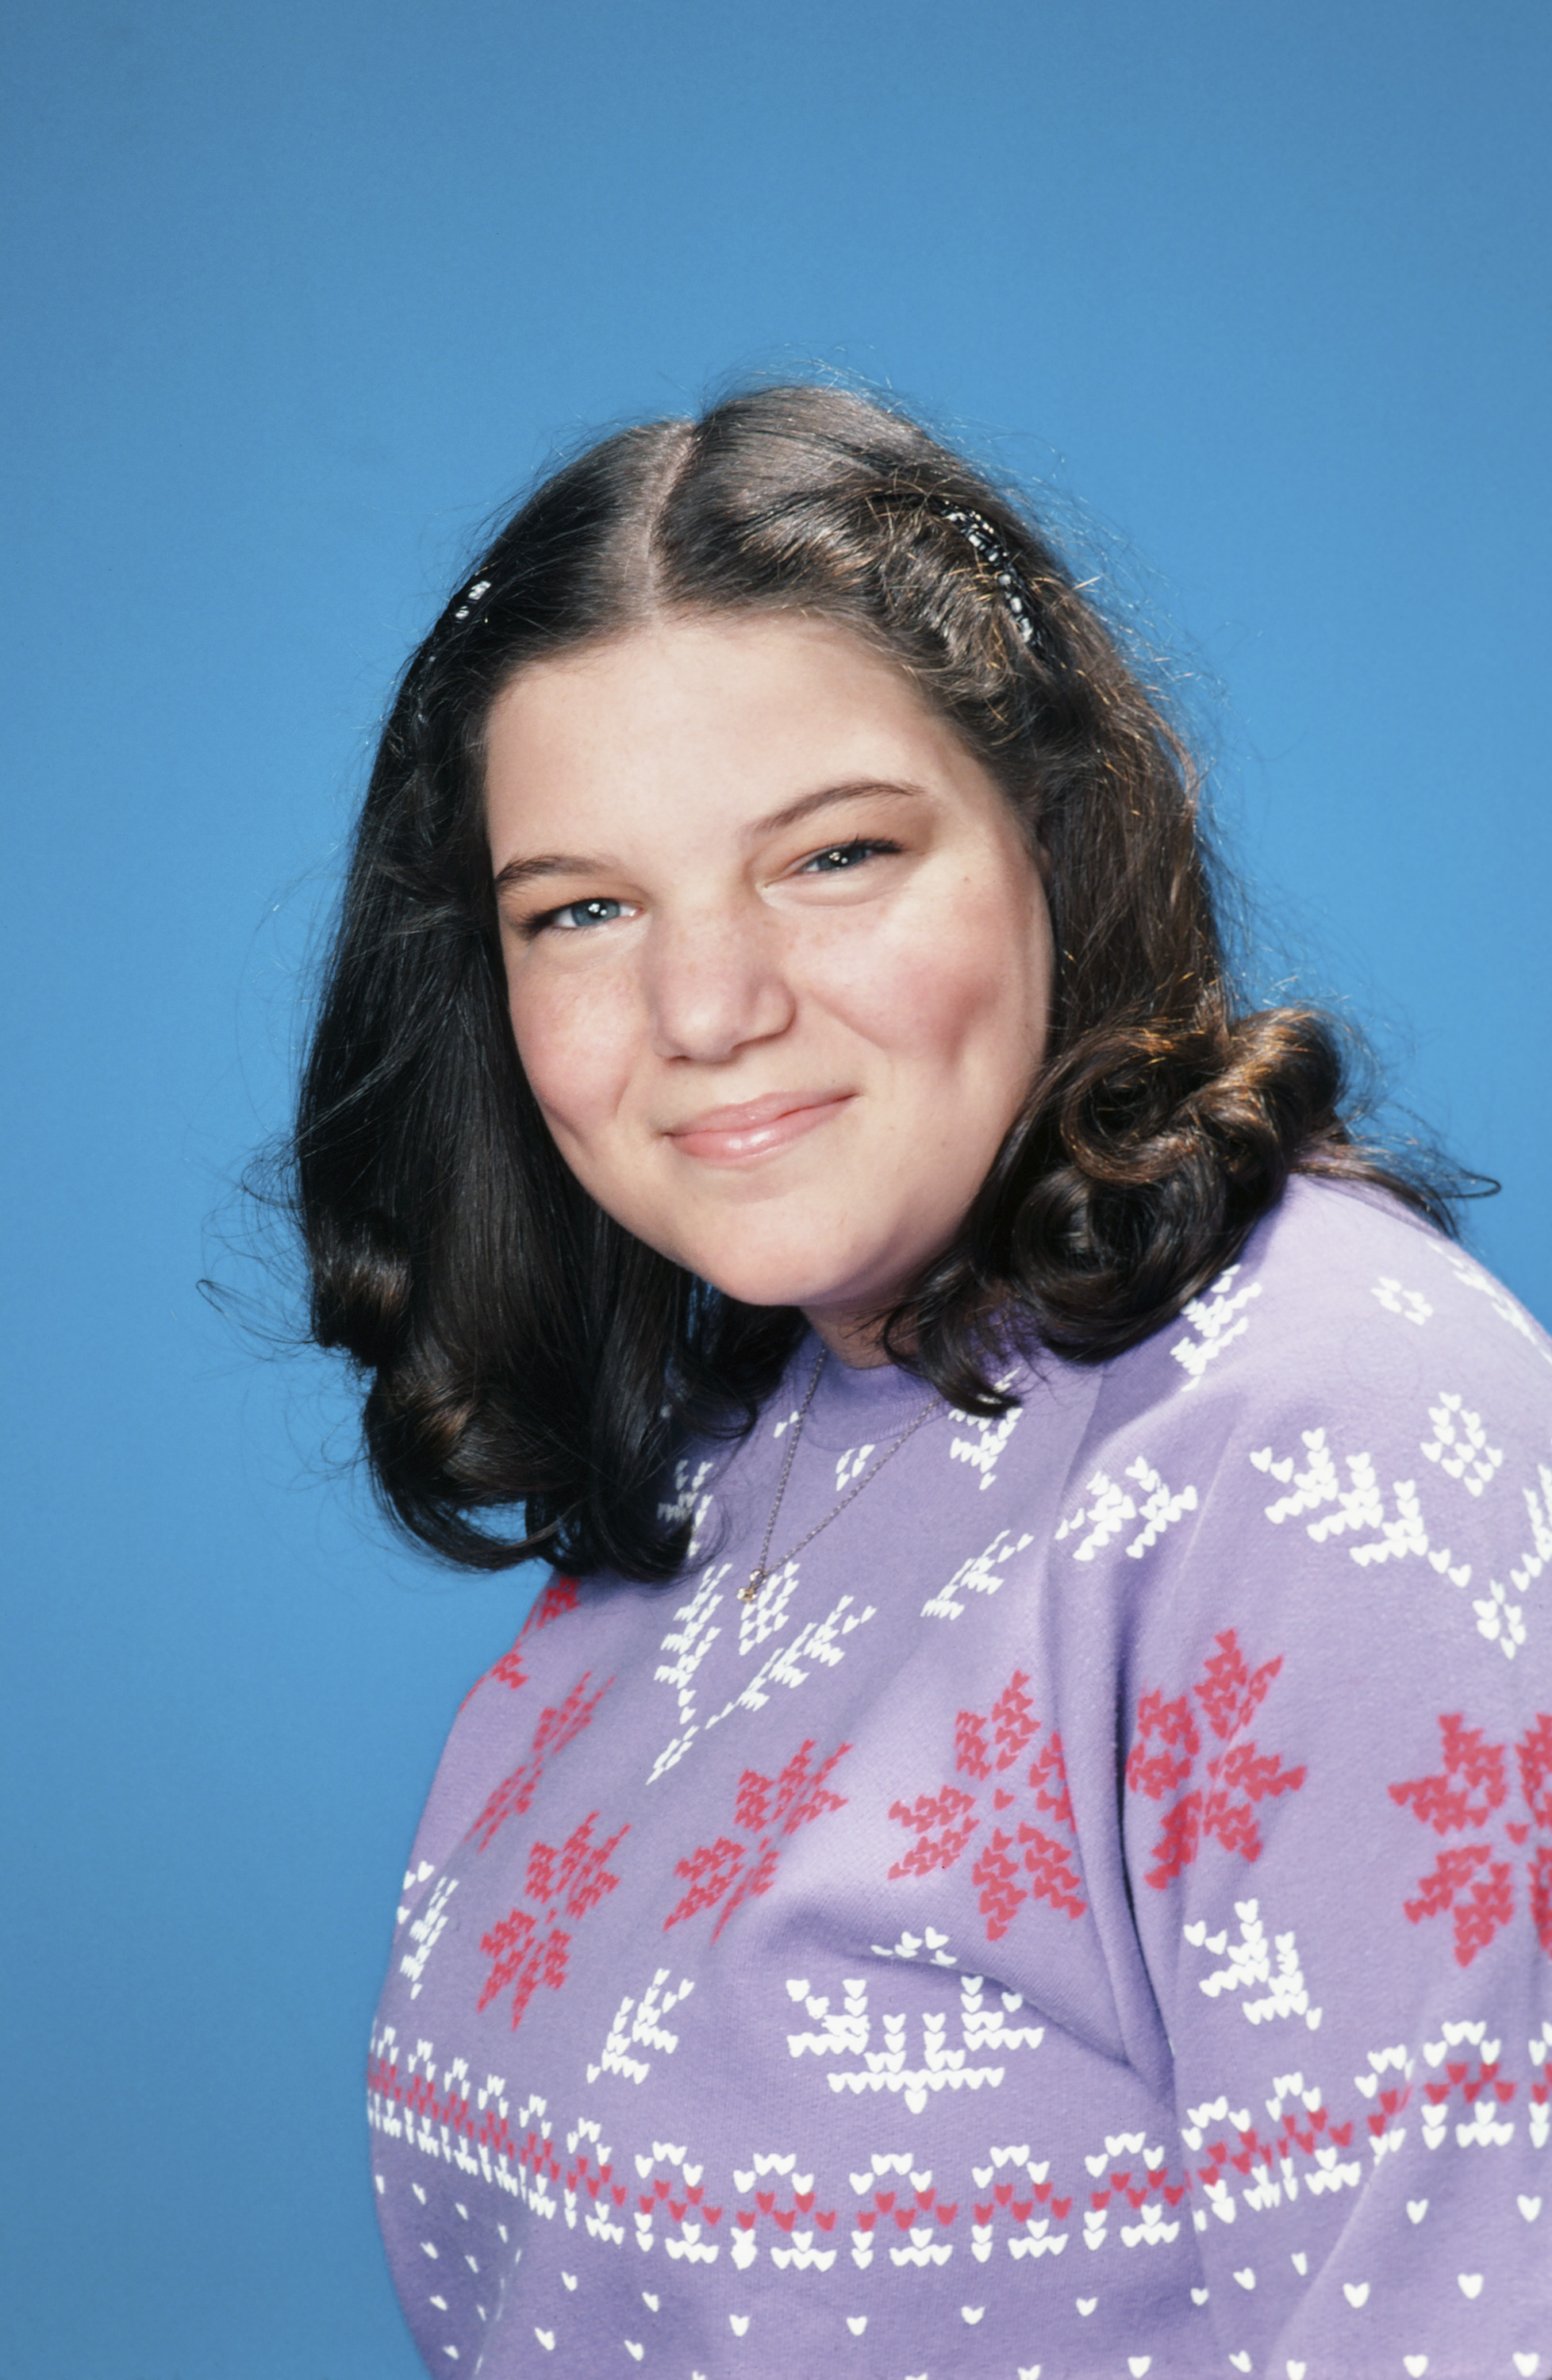 Mindy Cohn as Natalie Letisha Sage Green on season 2 of "The Facts of Life" in 1980 | Source: Getty Images